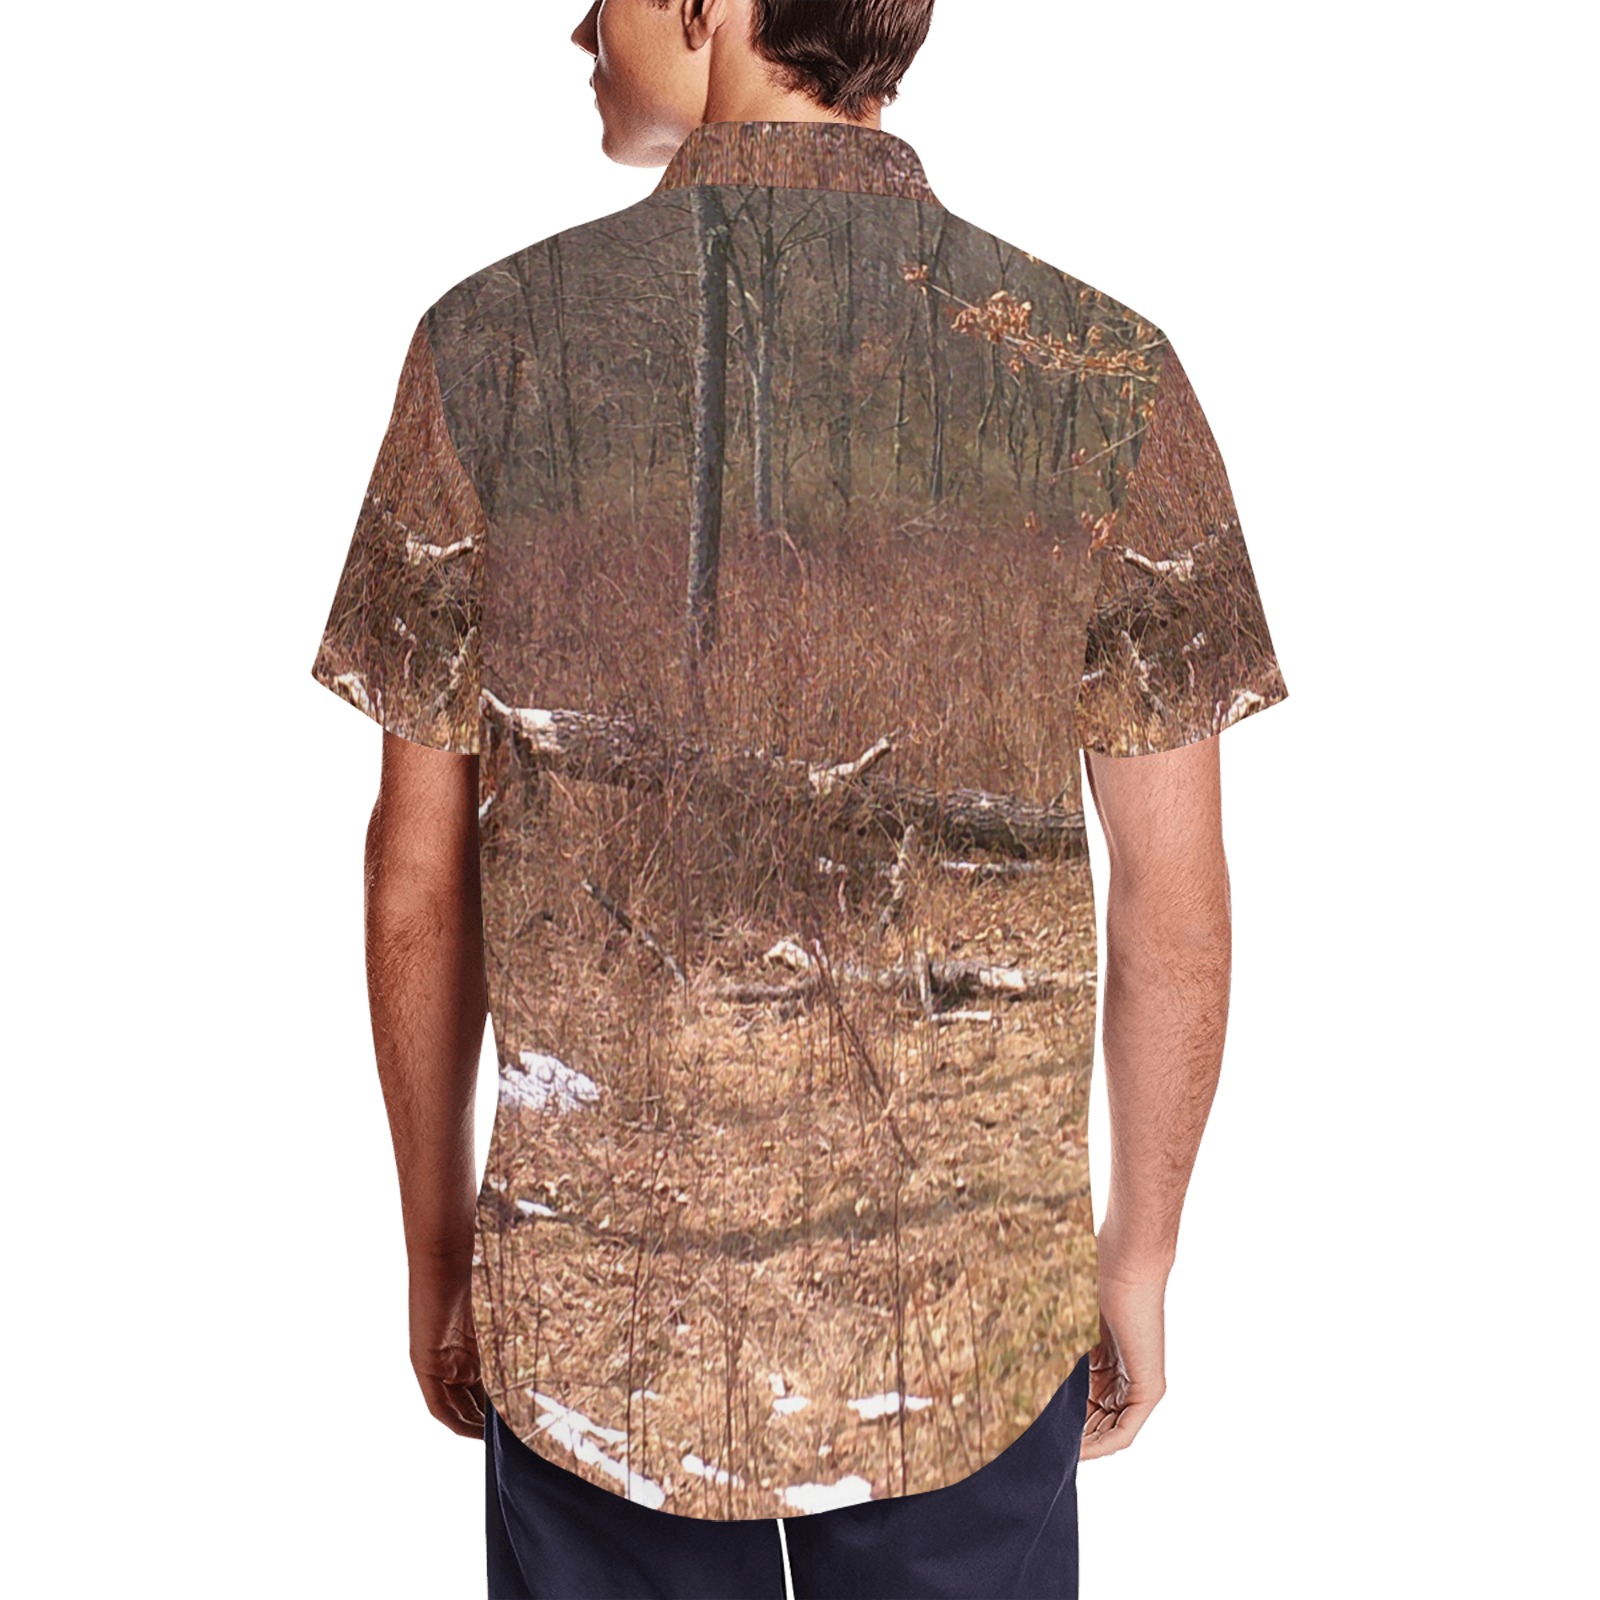 Falling tree in the woods Men's Short Sleeve Shirt with Lapel Collar (Model T54)